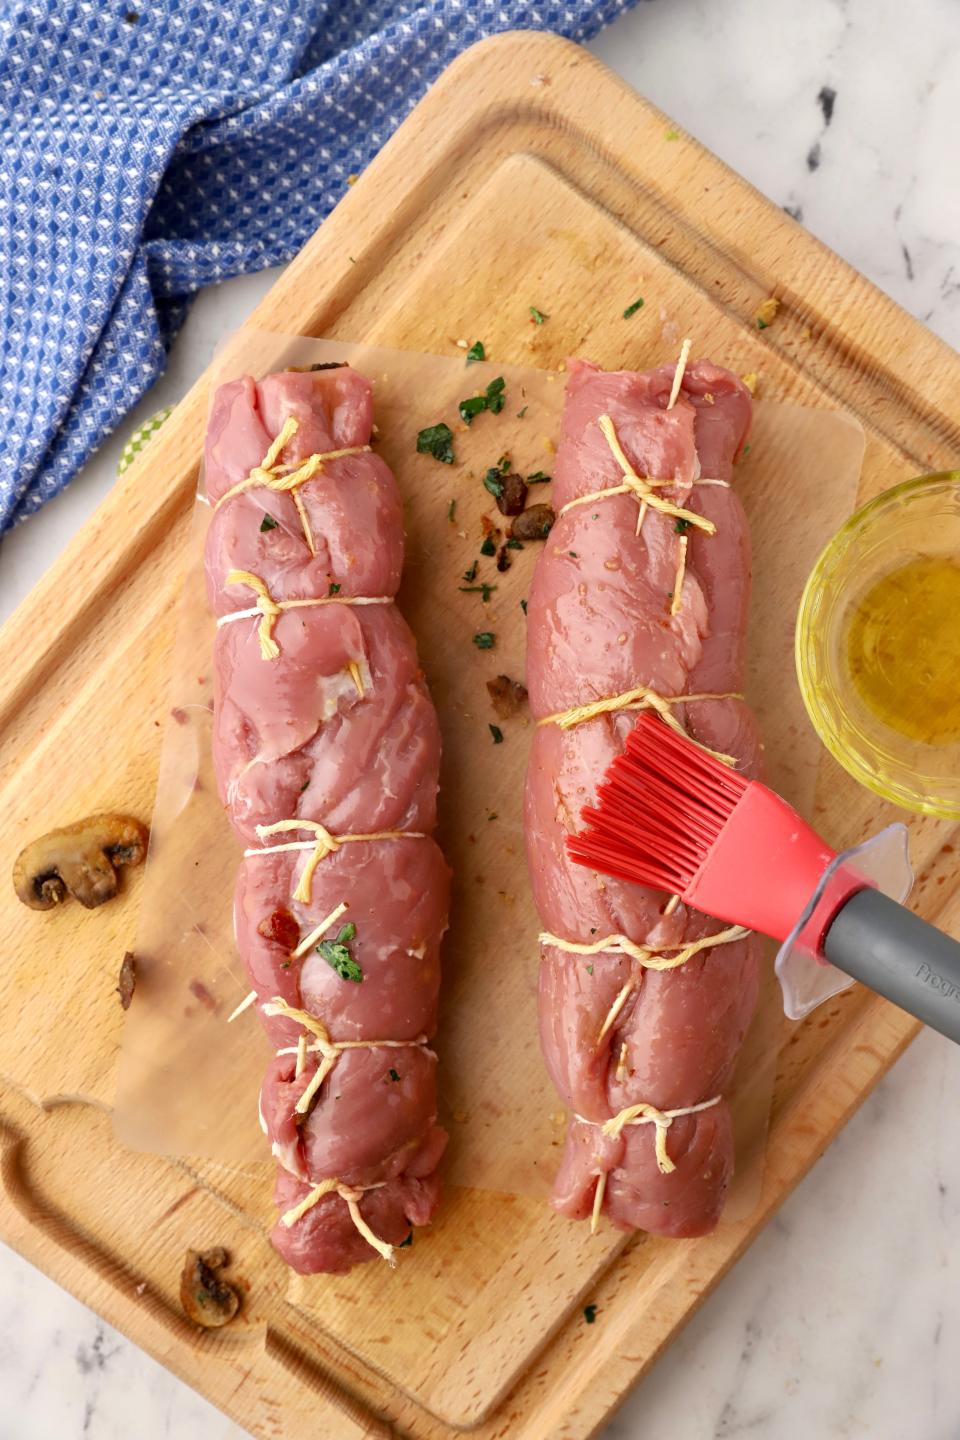 Starting with a long side, tightly roll up each tenderloin. Secure the seams with toothpicks. Then tie each tenderloin securely with kitchen string to hold it together.